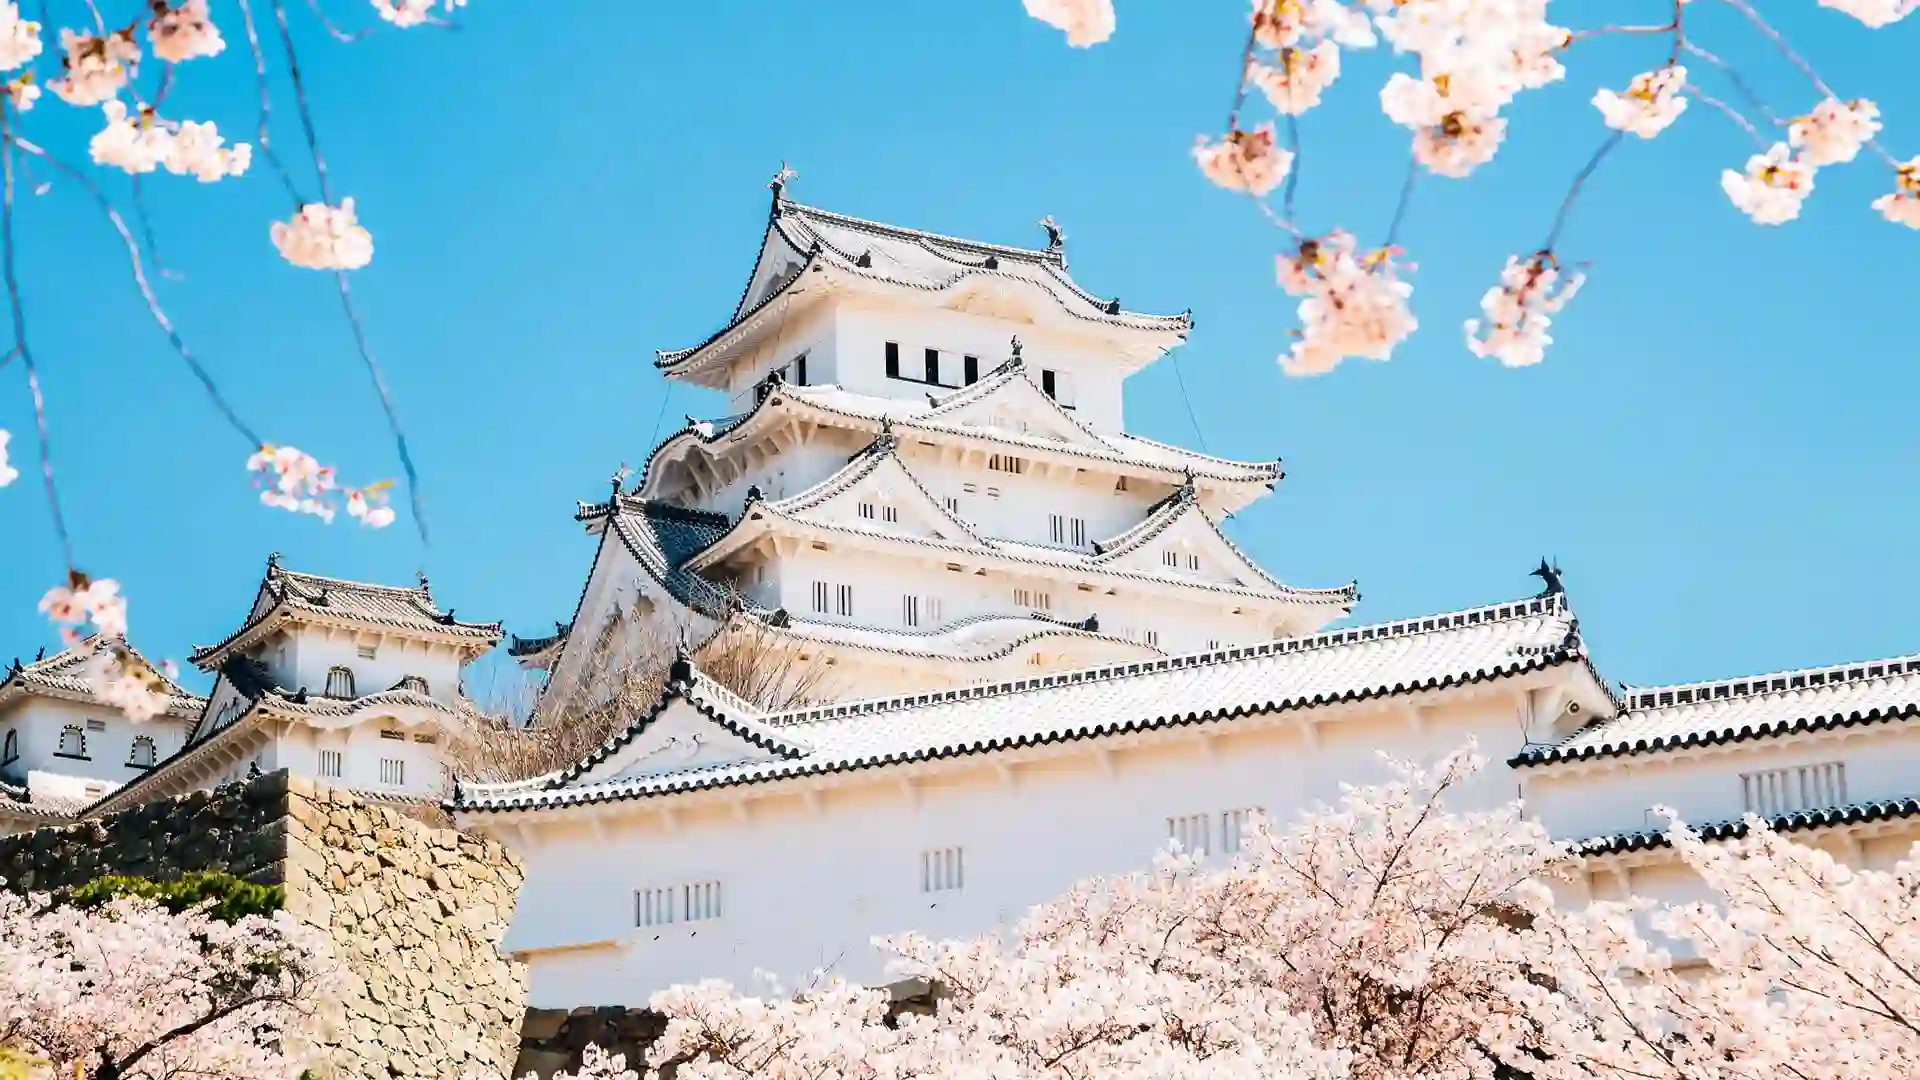 Pink cherry blossoms bloom around white castle below blue sky.